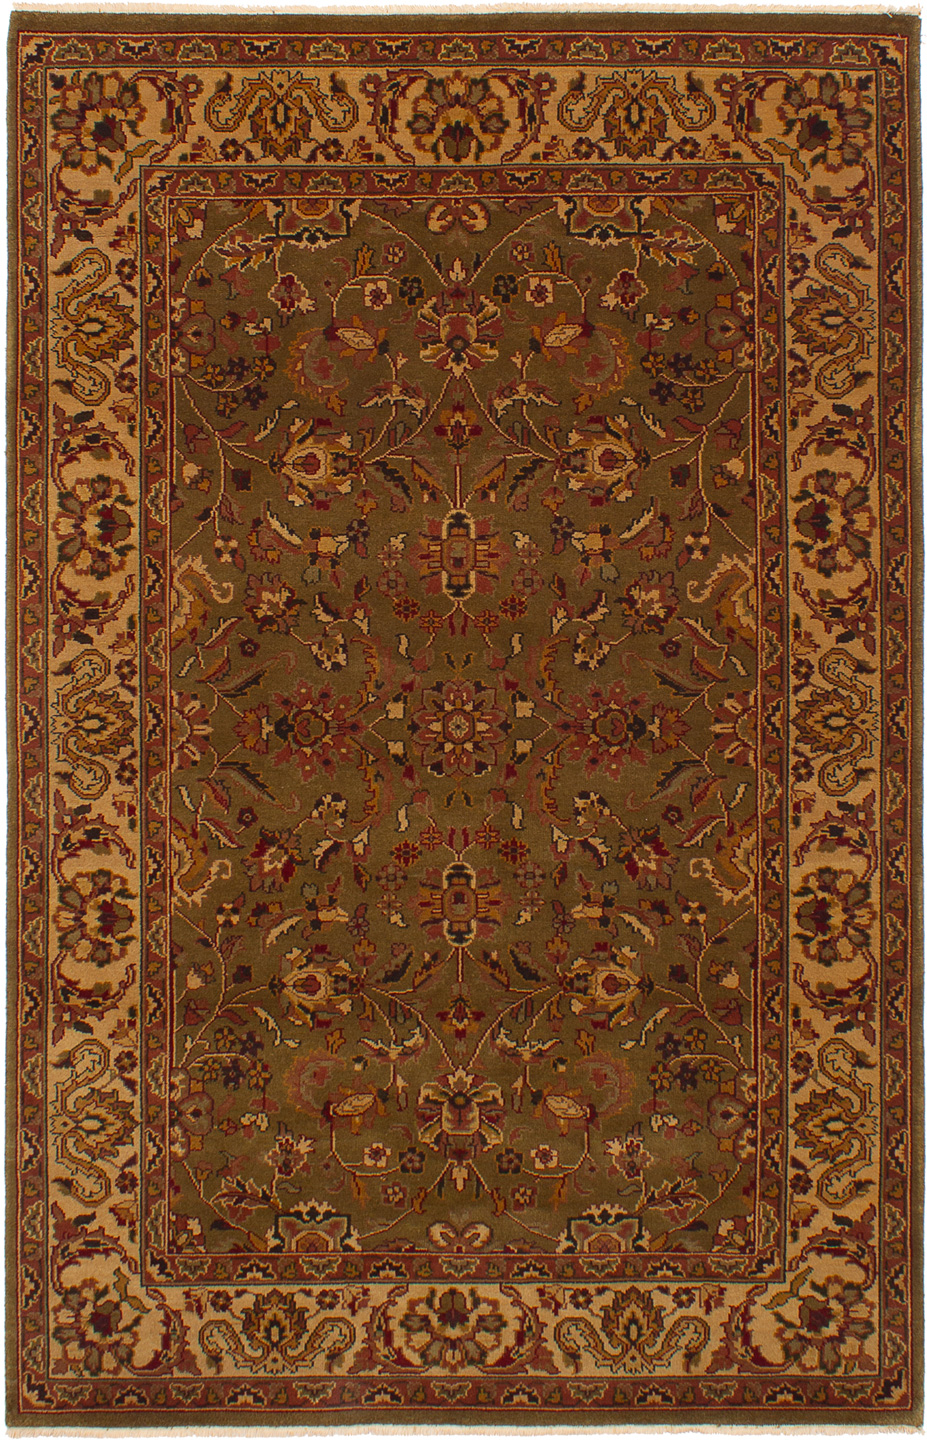 Hand-knotted Finest Agra Jaipur Dark Olive Green Wool Rug 5'6" x 8'6" Size: 5'6" x 8'6"  